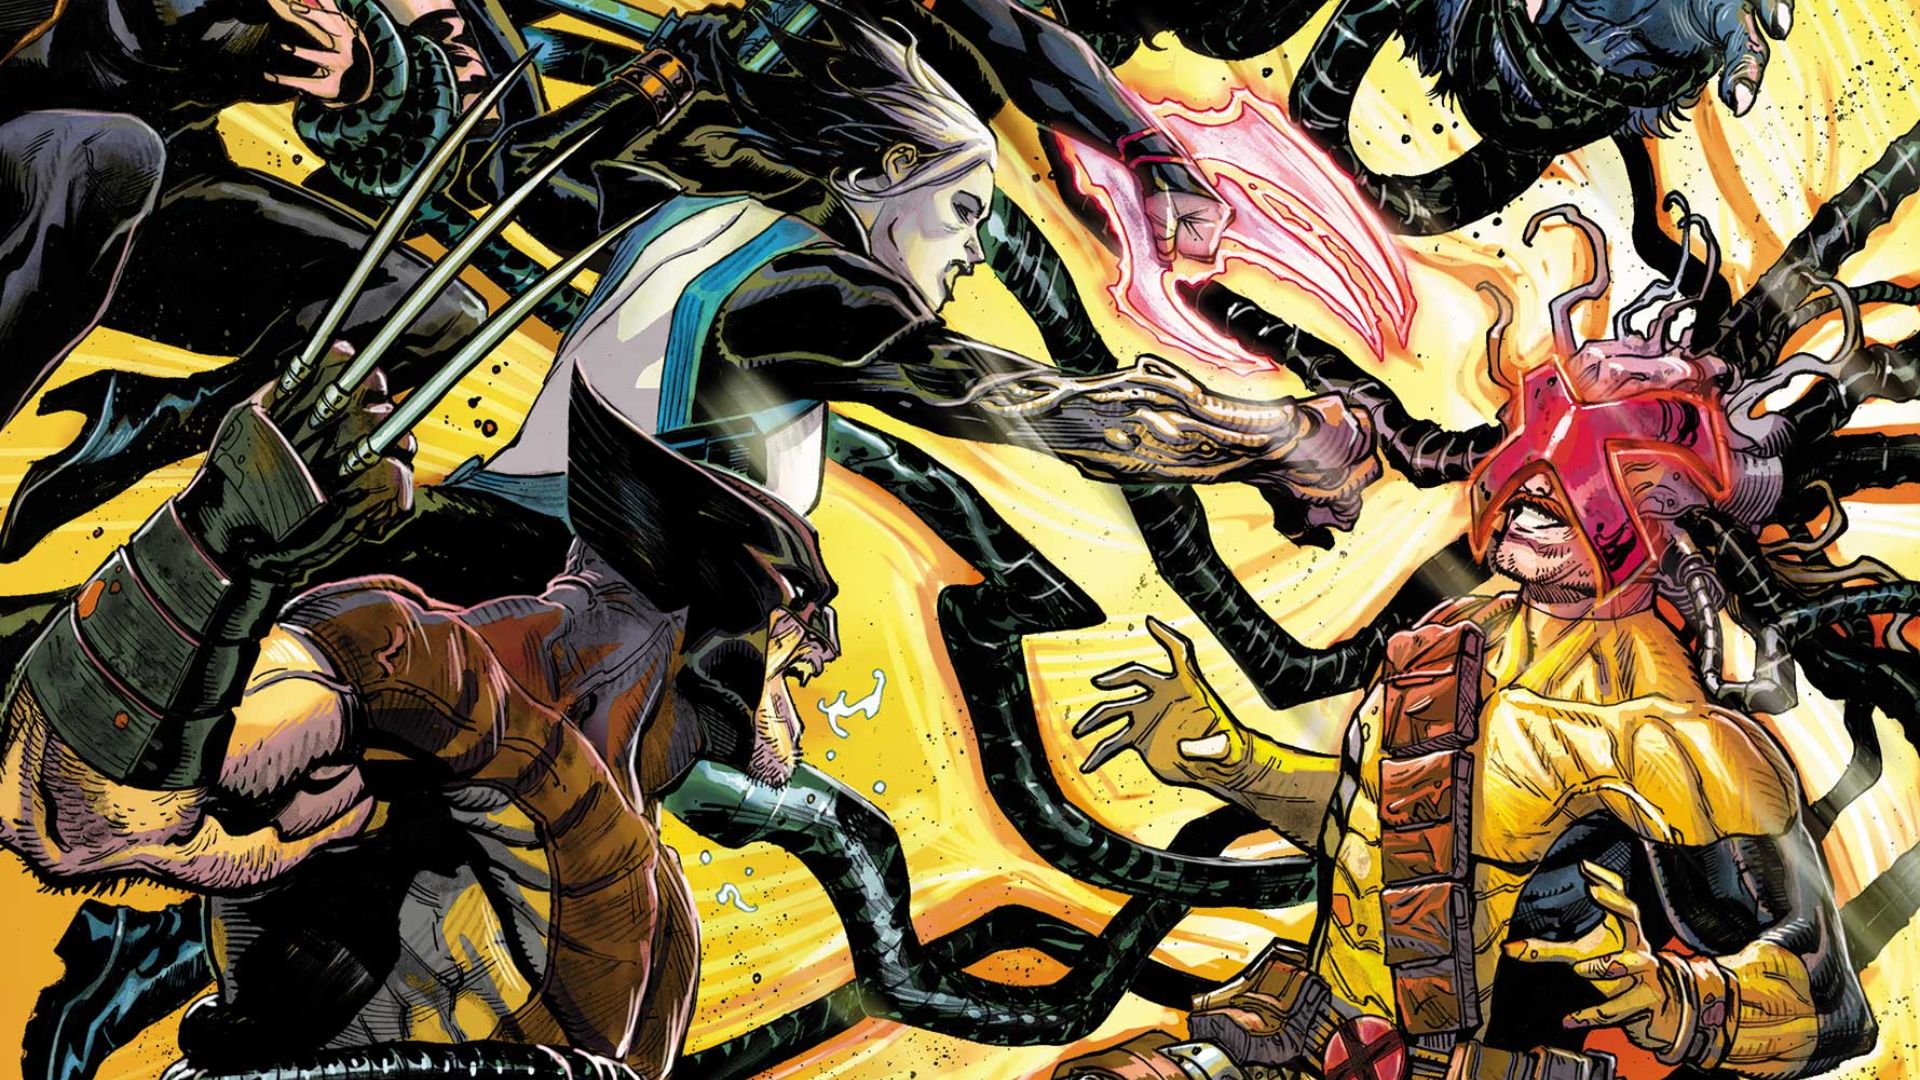 X-Force faces off against an evil Cerebro with new members and a new artist in 'Destiny of X' thumbnail